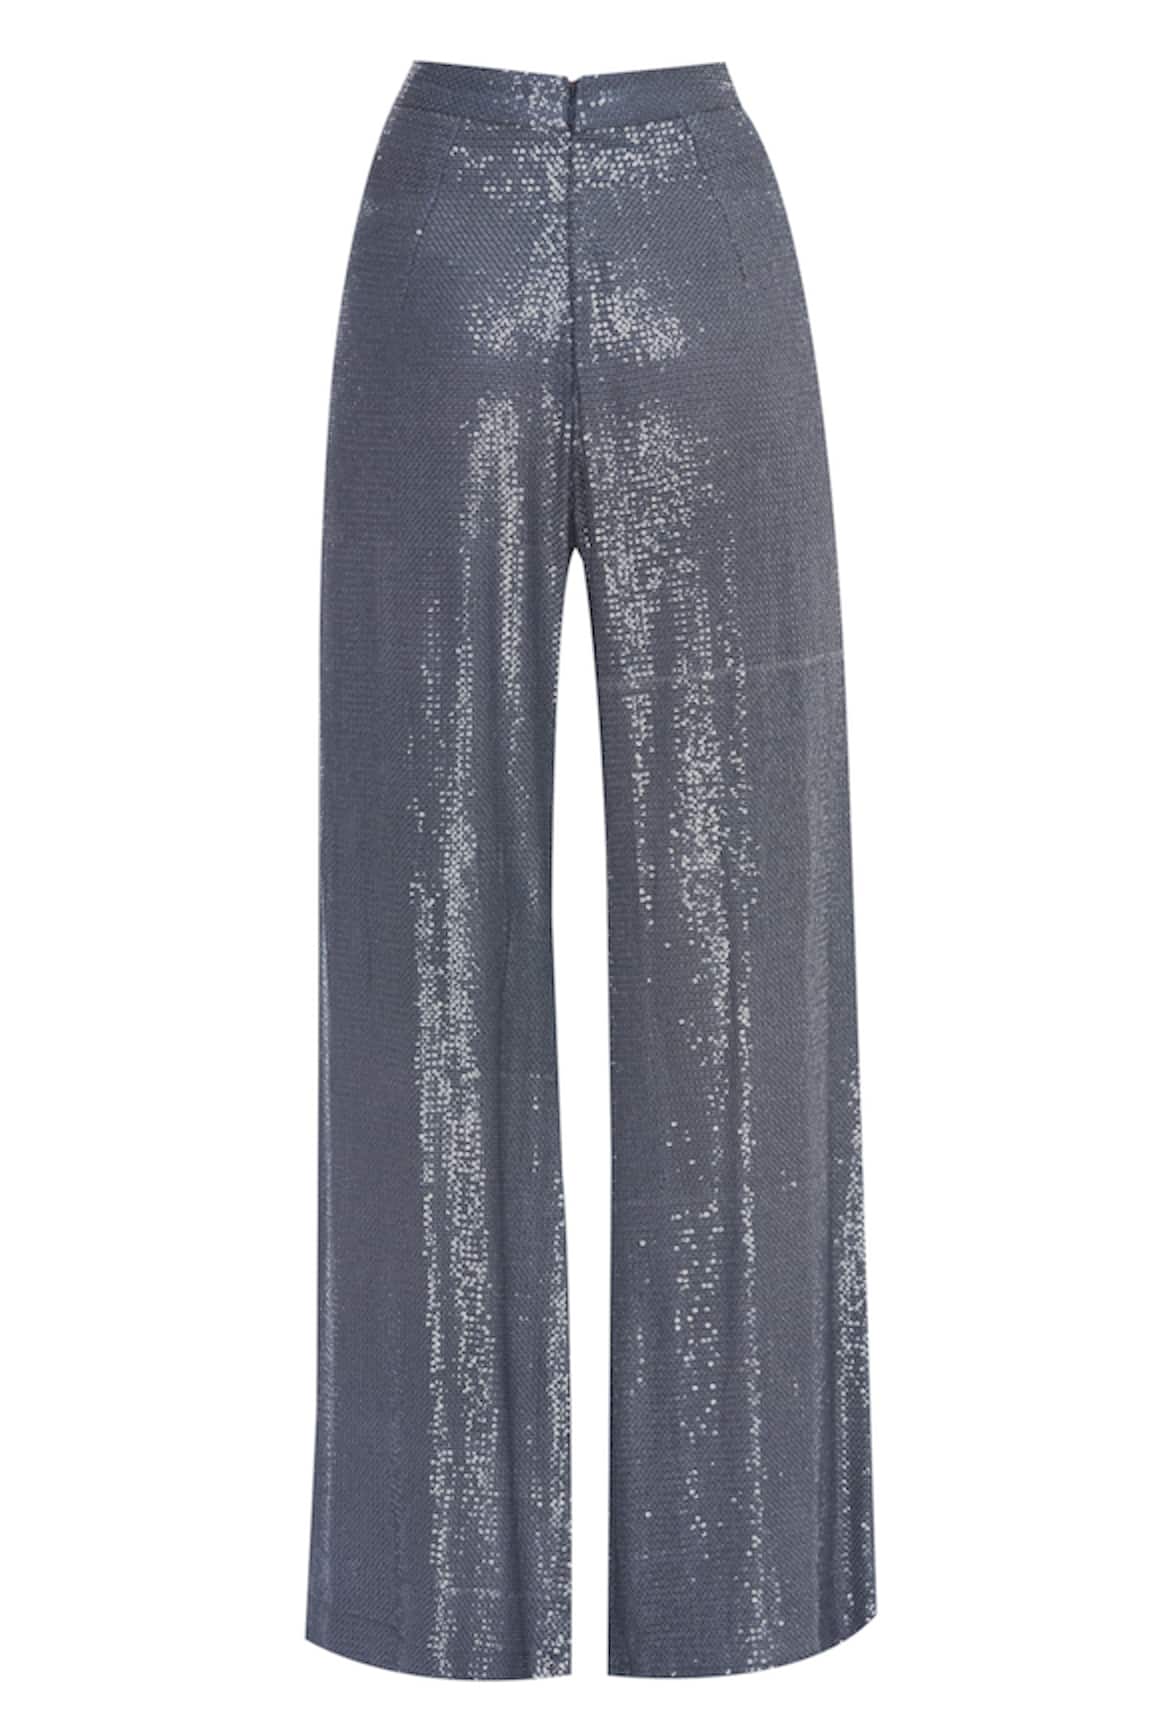 Attic Salt Trousers and Pants  Buy Attic Salt Curves Grey Sequins Tulle  High Rise Pants Online  Nykaa Fashion